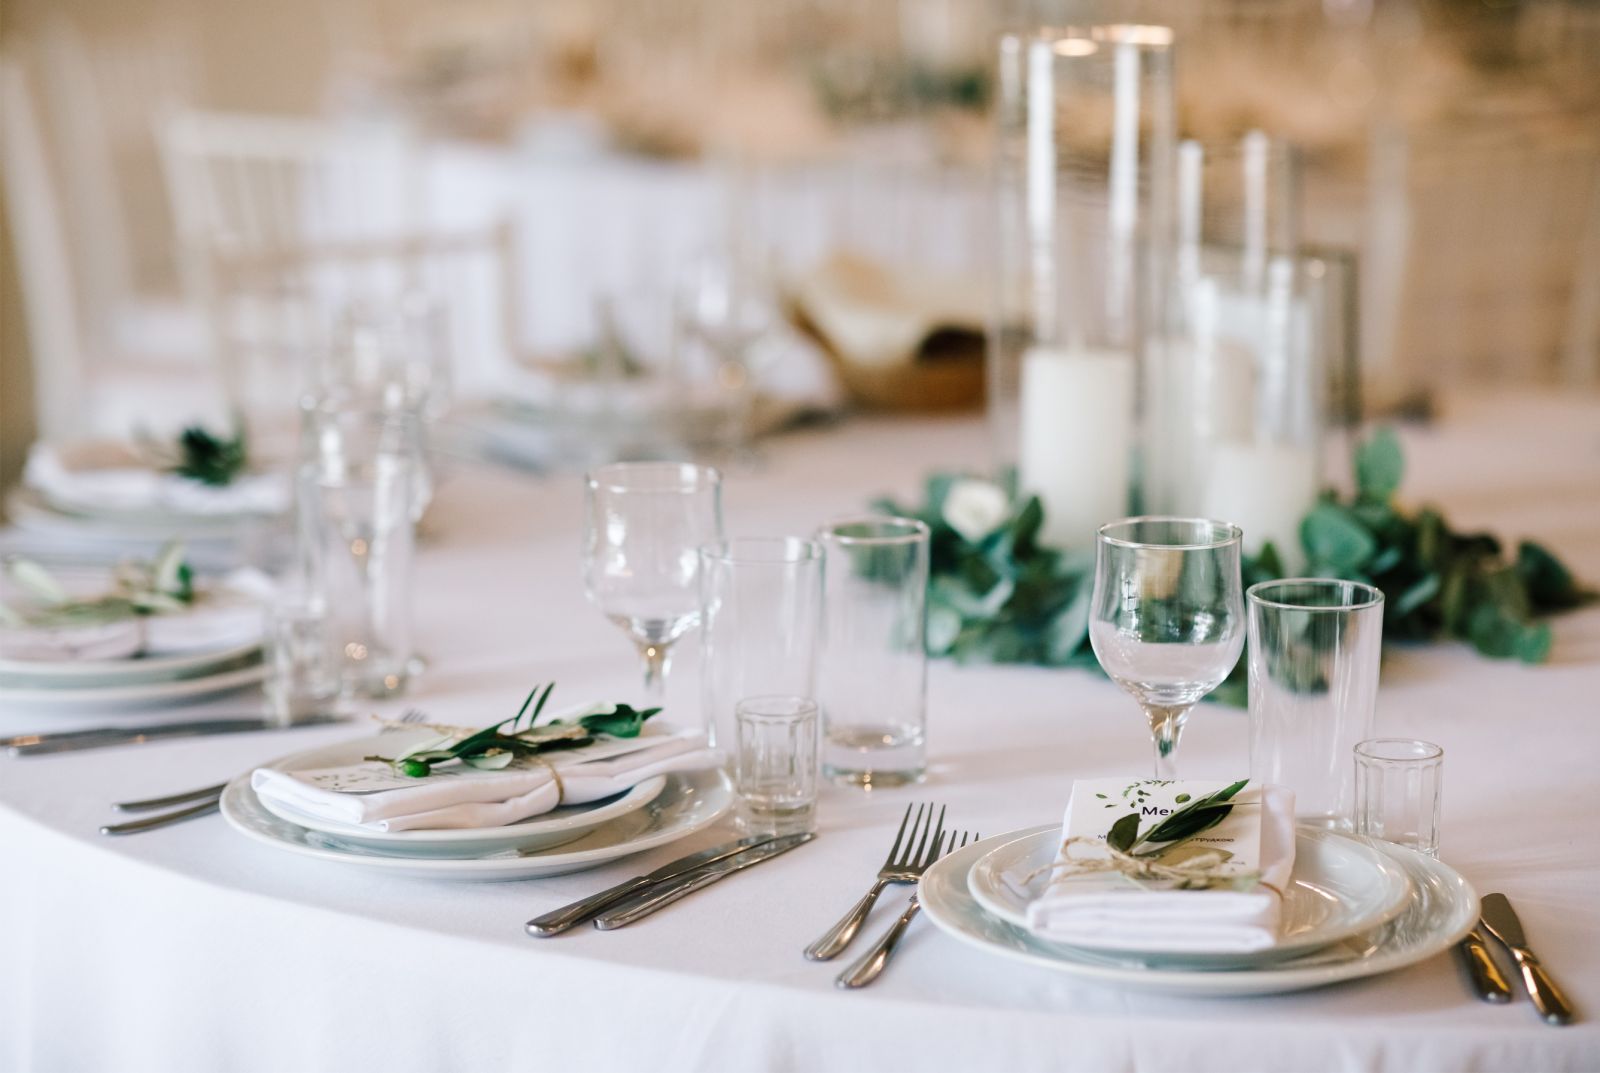 Detail image of a wedding dinner table